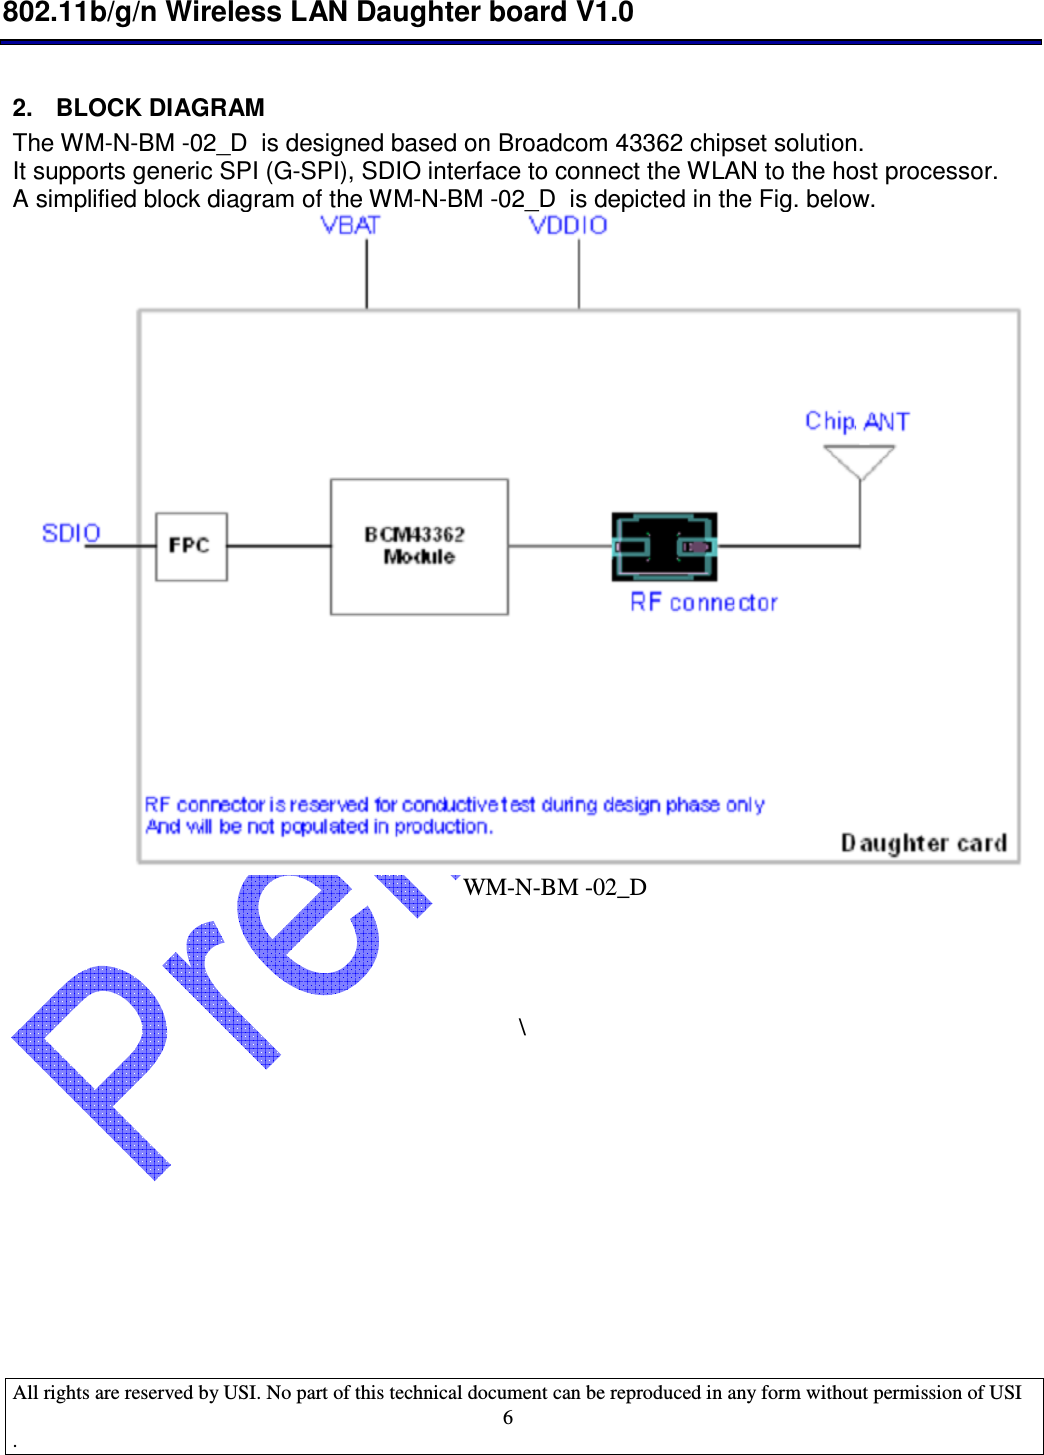  802.11b/g/n Wireless LAN Daughter board V1.0  All rights are reserved by USI. No part of this technical document can be reproduced in any form without permission of USI .                                    6 2.  BLOCK DIAGRAM The WM-N-BM -02_D  is designed based on Broadcom 43362 chipset solution. It supports generic SPI (G-SPI), SDIO interface to connect the WLAN to the host processor.  A simplified block diagram of the WM-N-BM -02_D  is depicted in the Fig. below.                                                                            WM-N-BM -02_D      \           